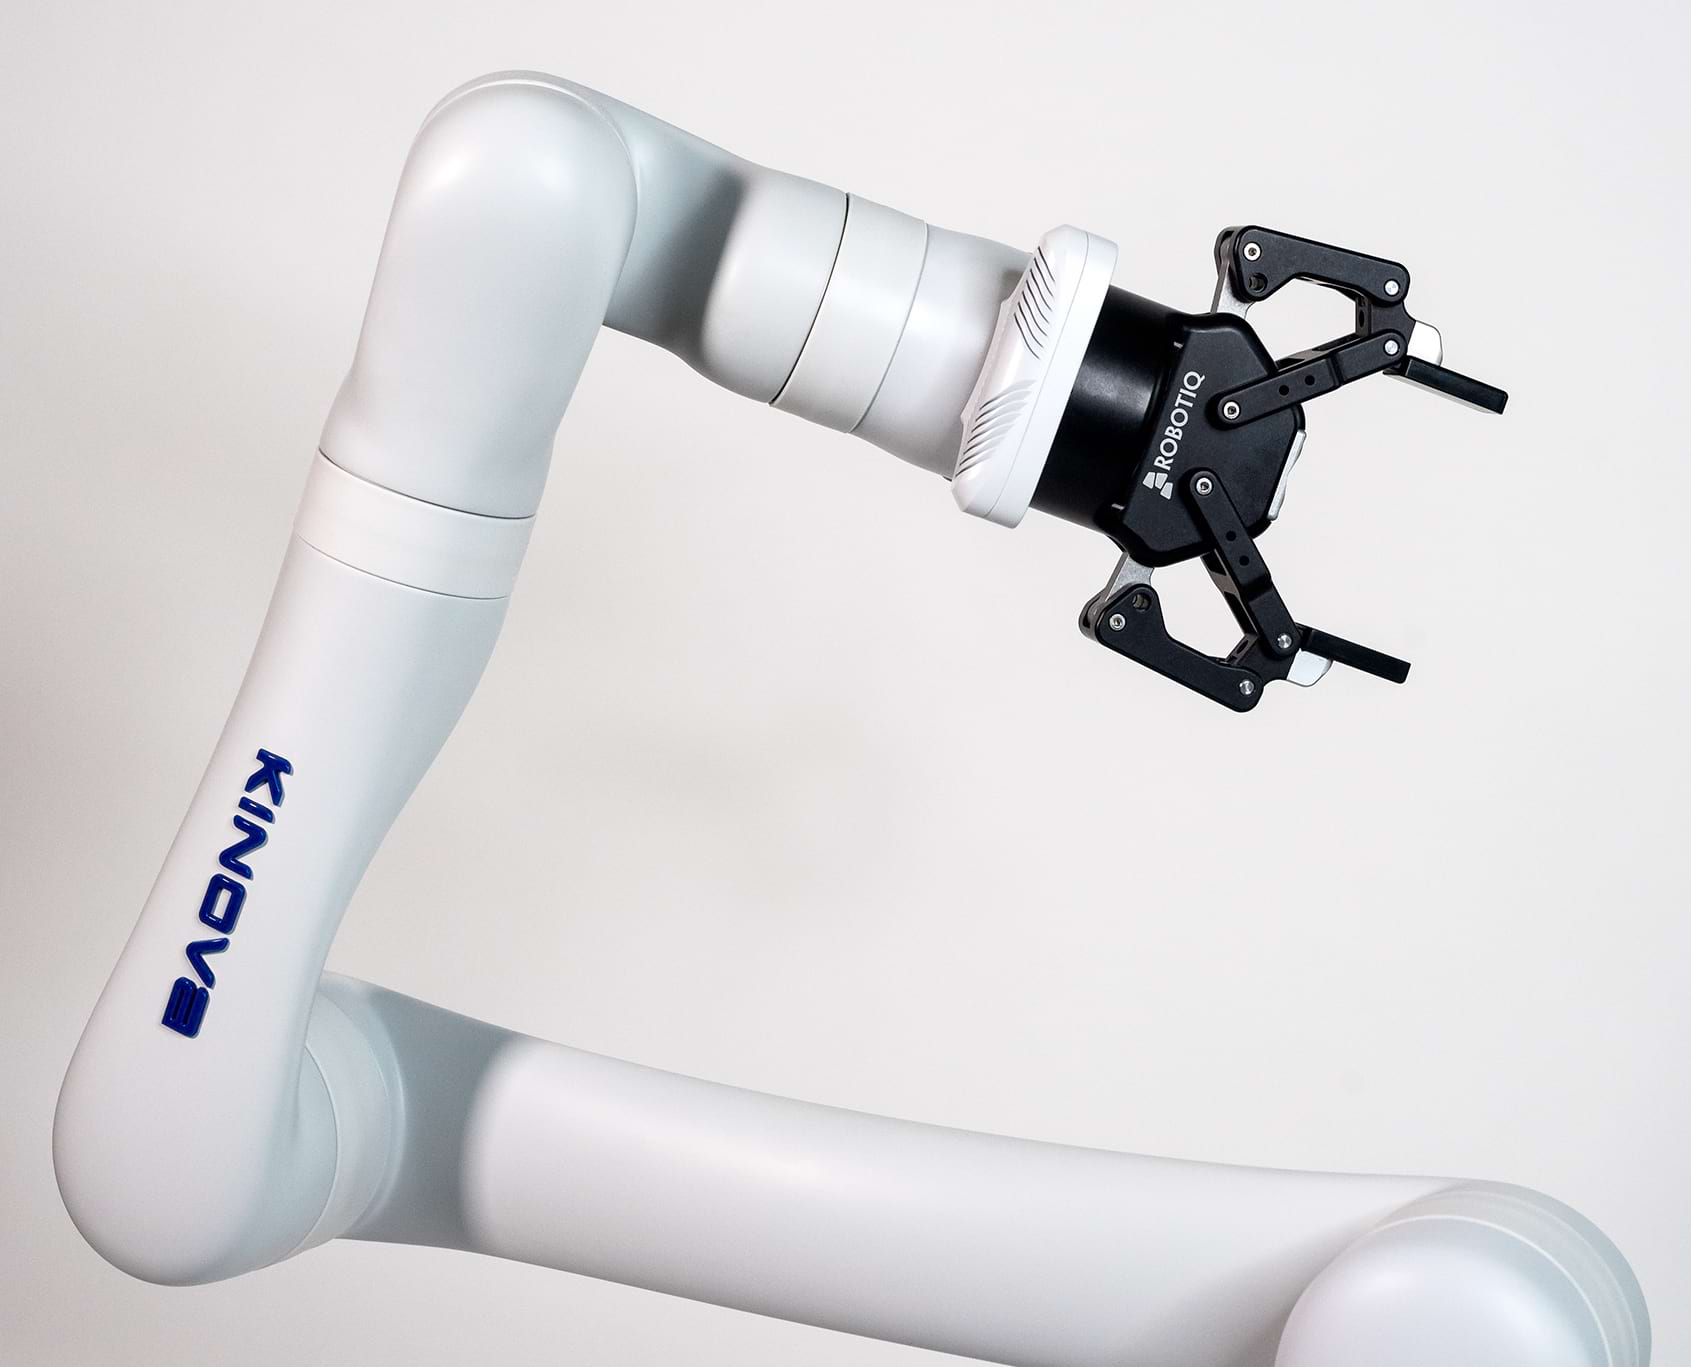 A close-up picture of the Kinova robotic arm.